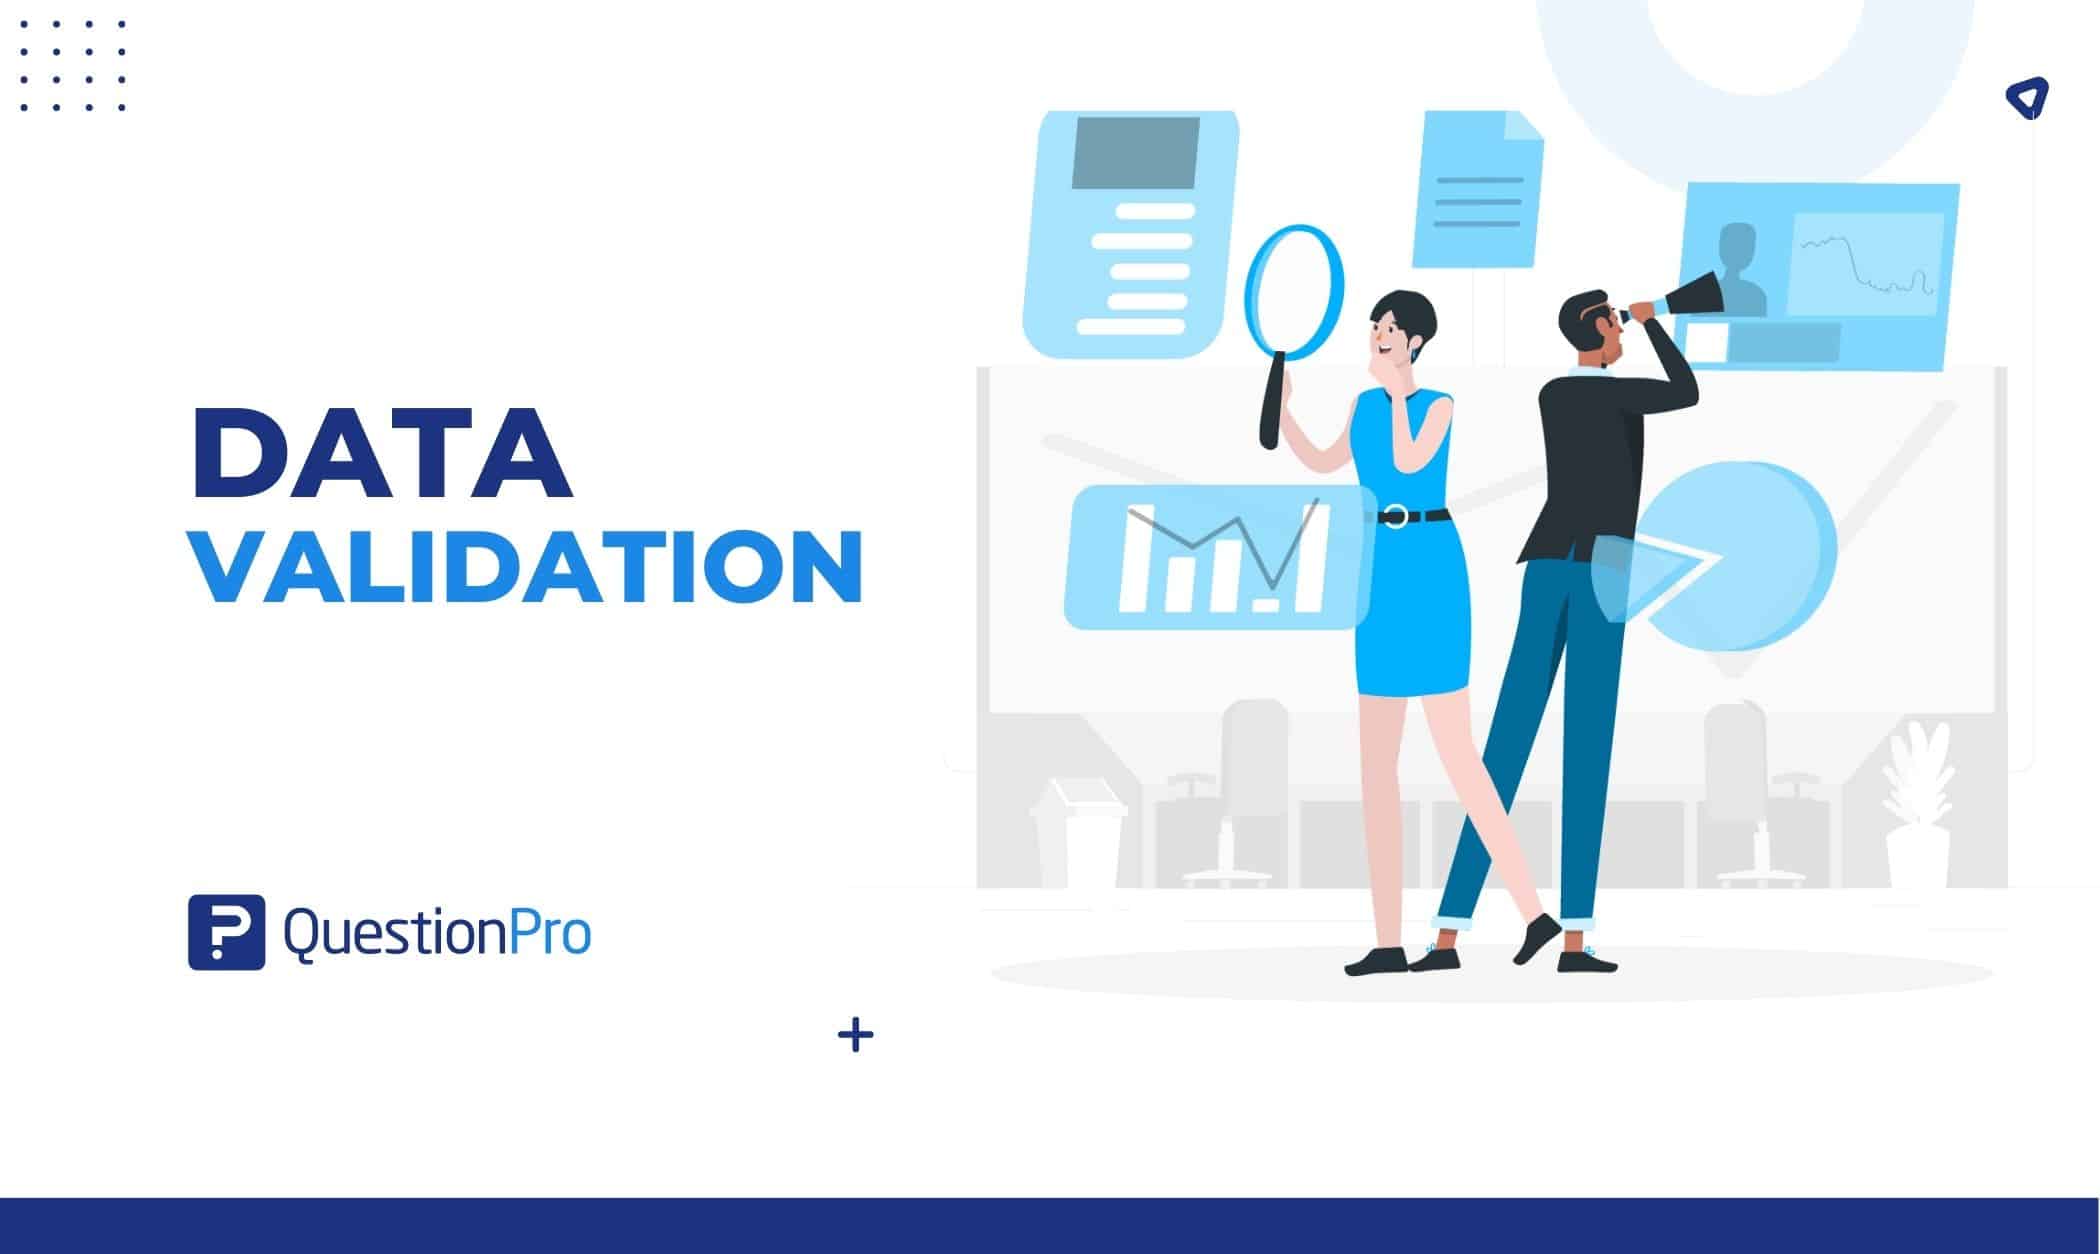 Data validation comes in many forms and is crucial for ensuring data consistency and integrity. However, it has both pros and cons. Let's go!